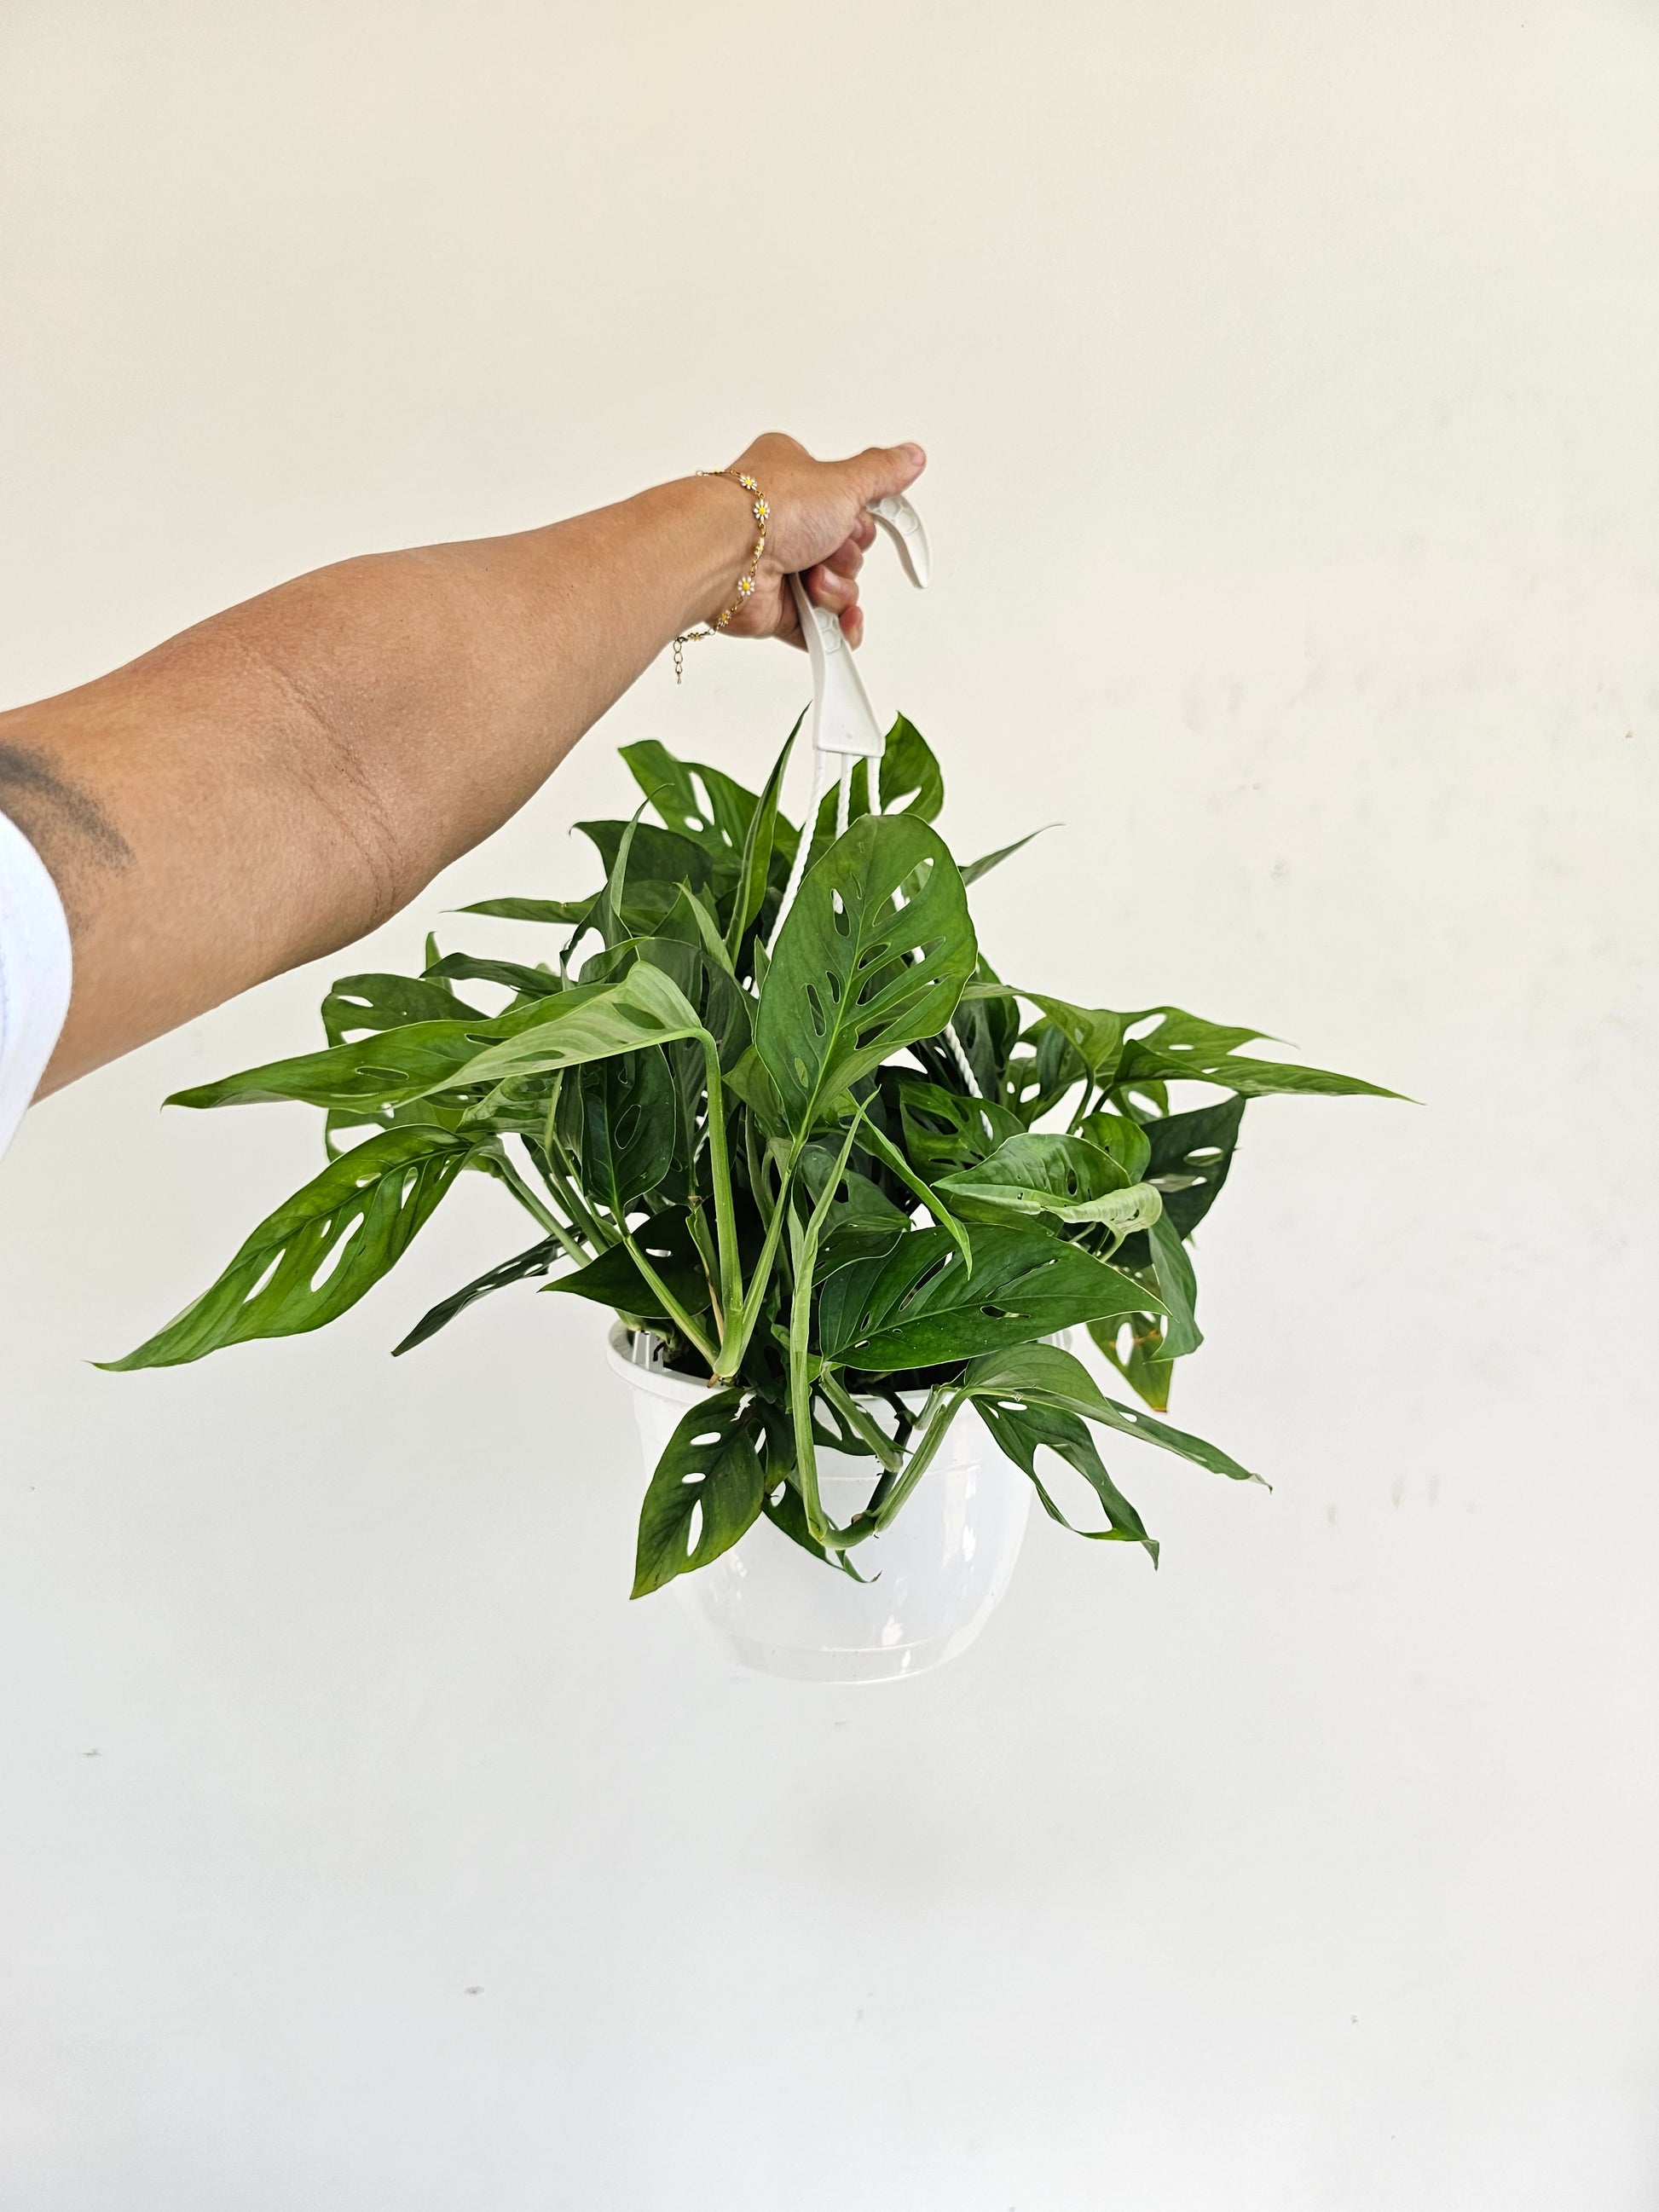 Swiss Cheese Vine (Monstera adansonii) in a 8 inch pot. Indoor plant for sale by Promise Supply for delivery and pickup in Toronto